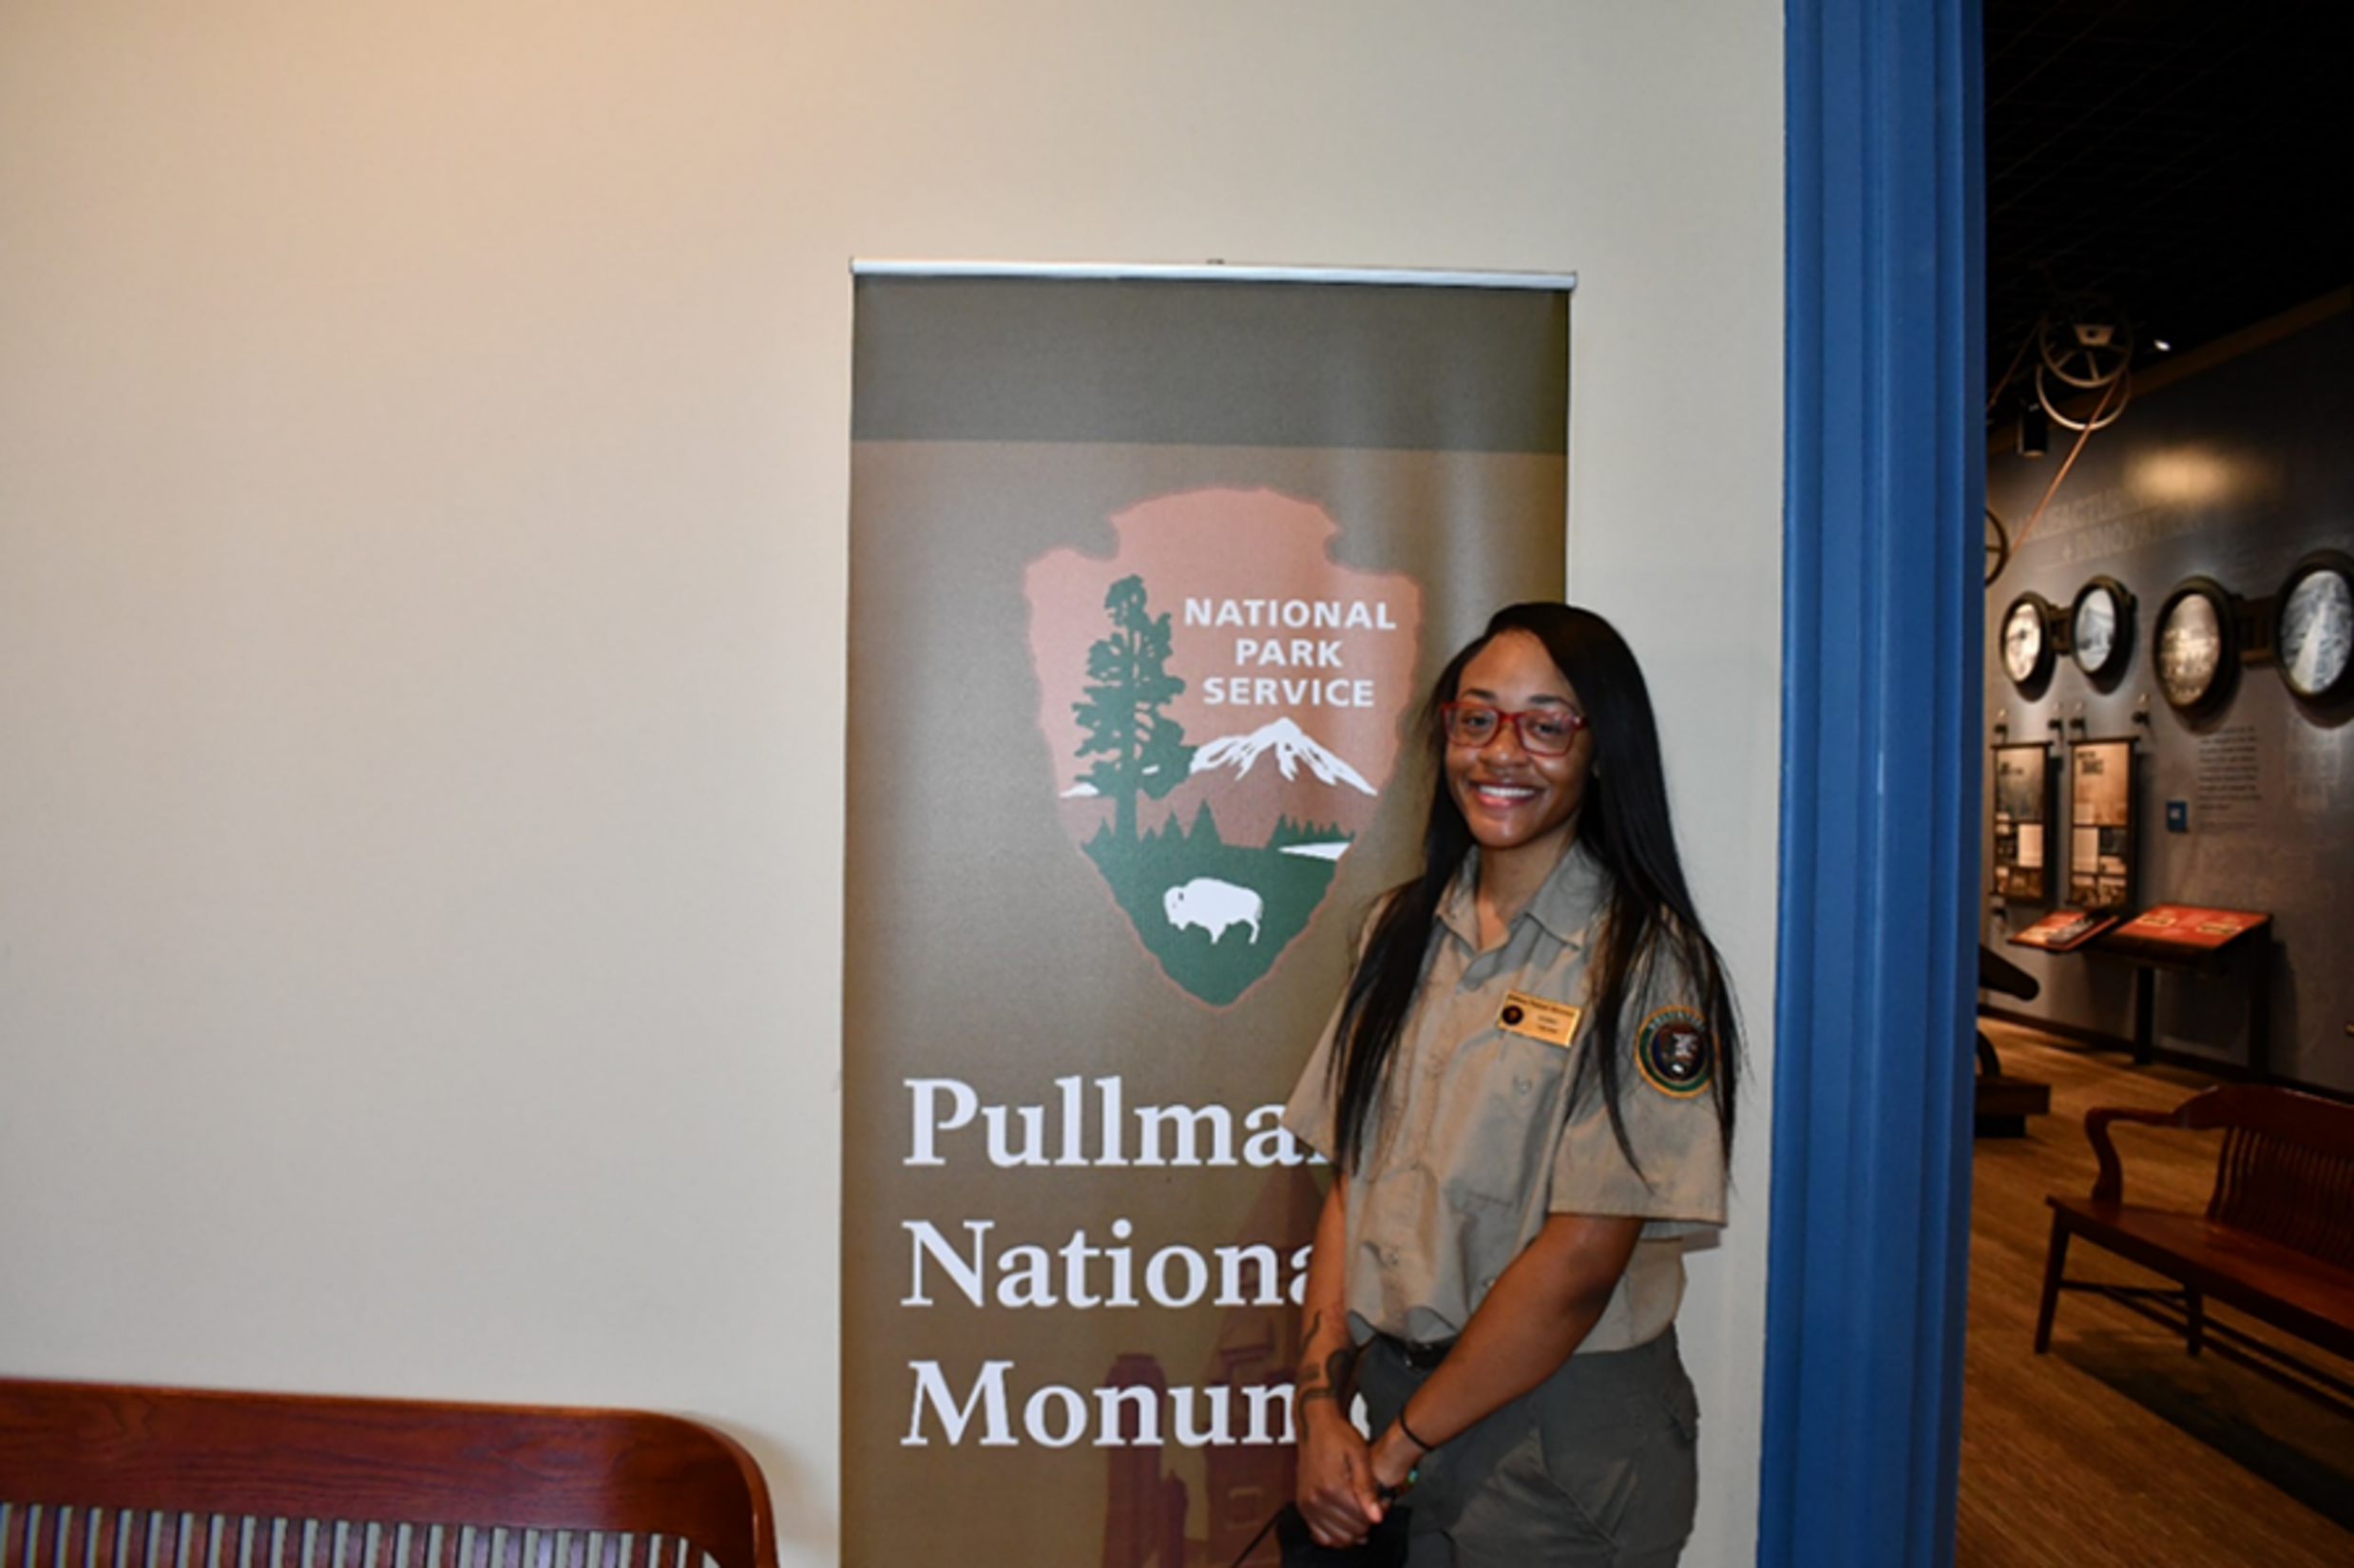 A volunteer in uniform smiles at the camera standing in front of banner with the NPS arrowhead and words "Pullman National Monument".